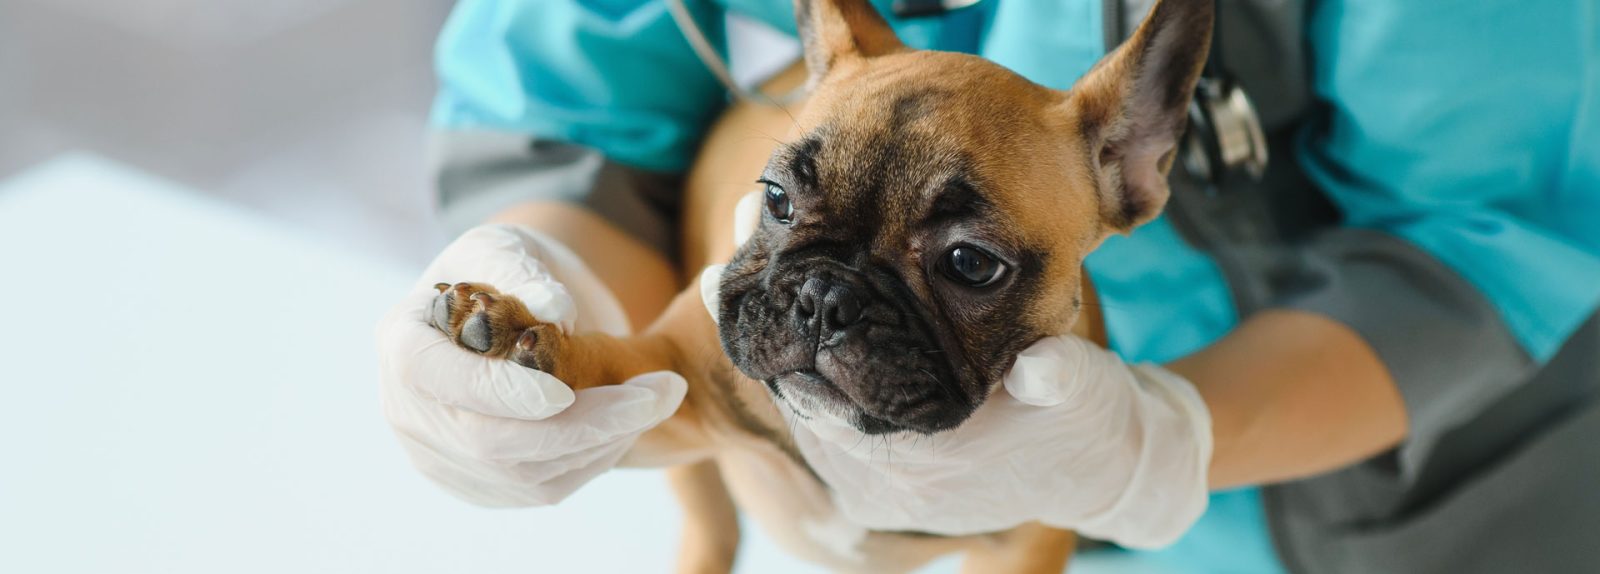 Urgent Care vs. Emergency Care: Seeking Care For Your Pets